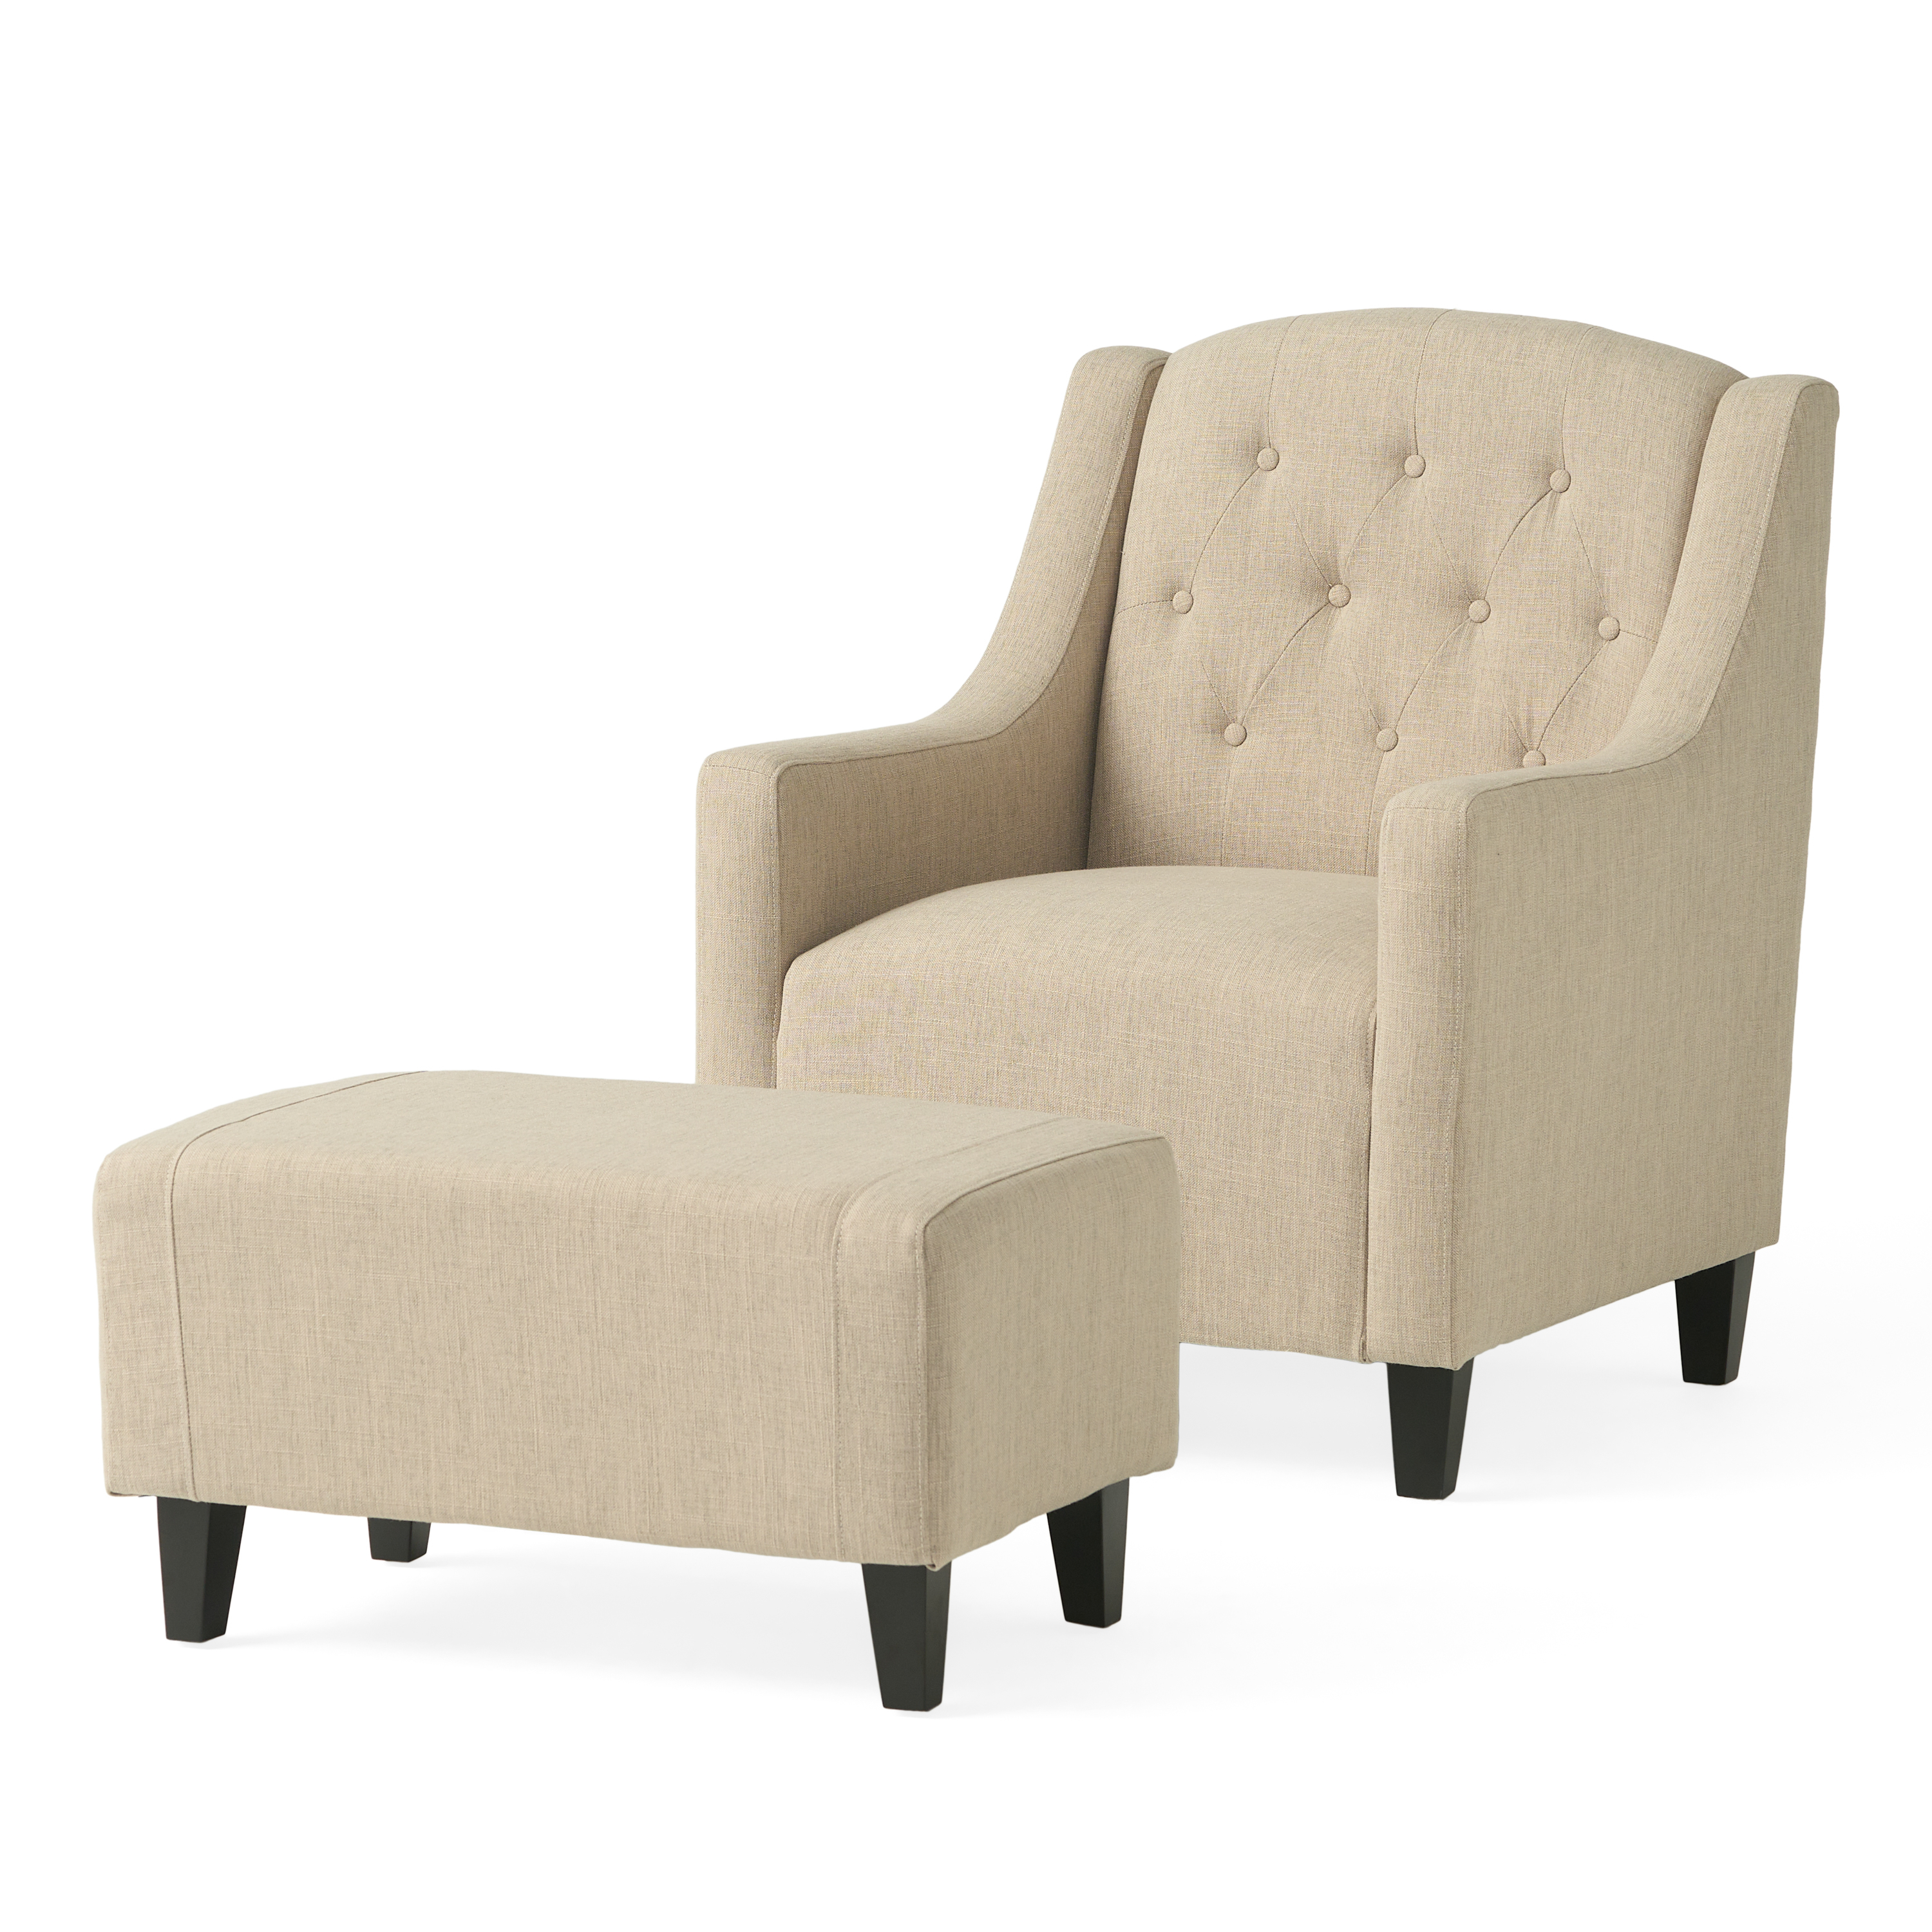 Empierre Fabric Club Chair And Ottoman - Beige